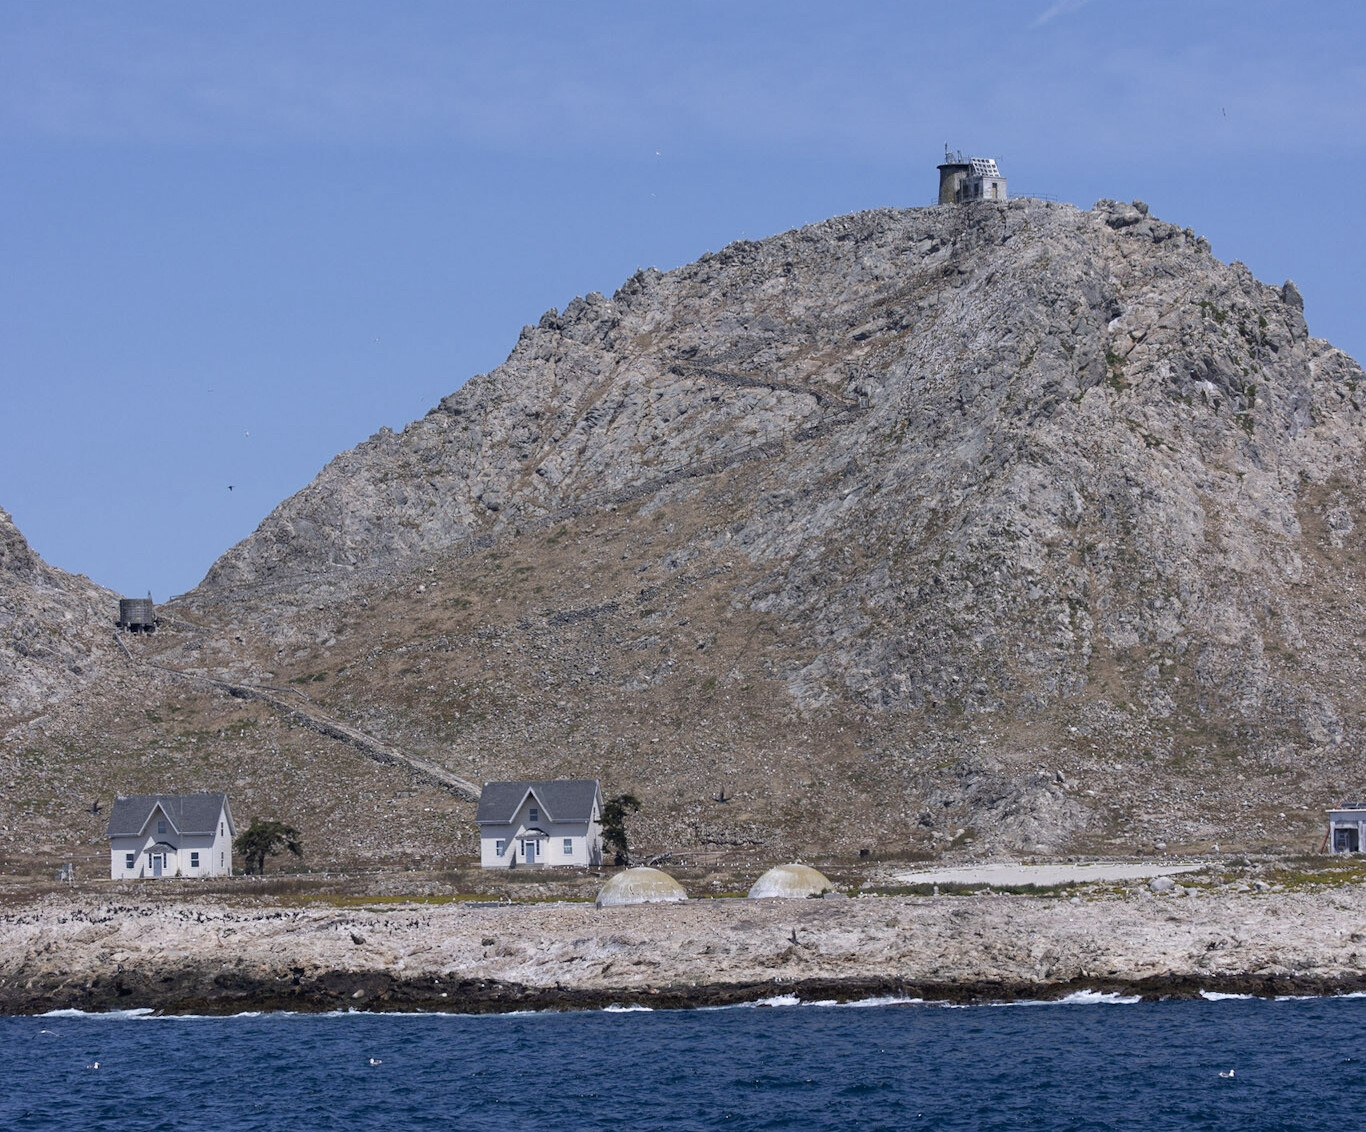 A small cluster of buildings on a rocky island.